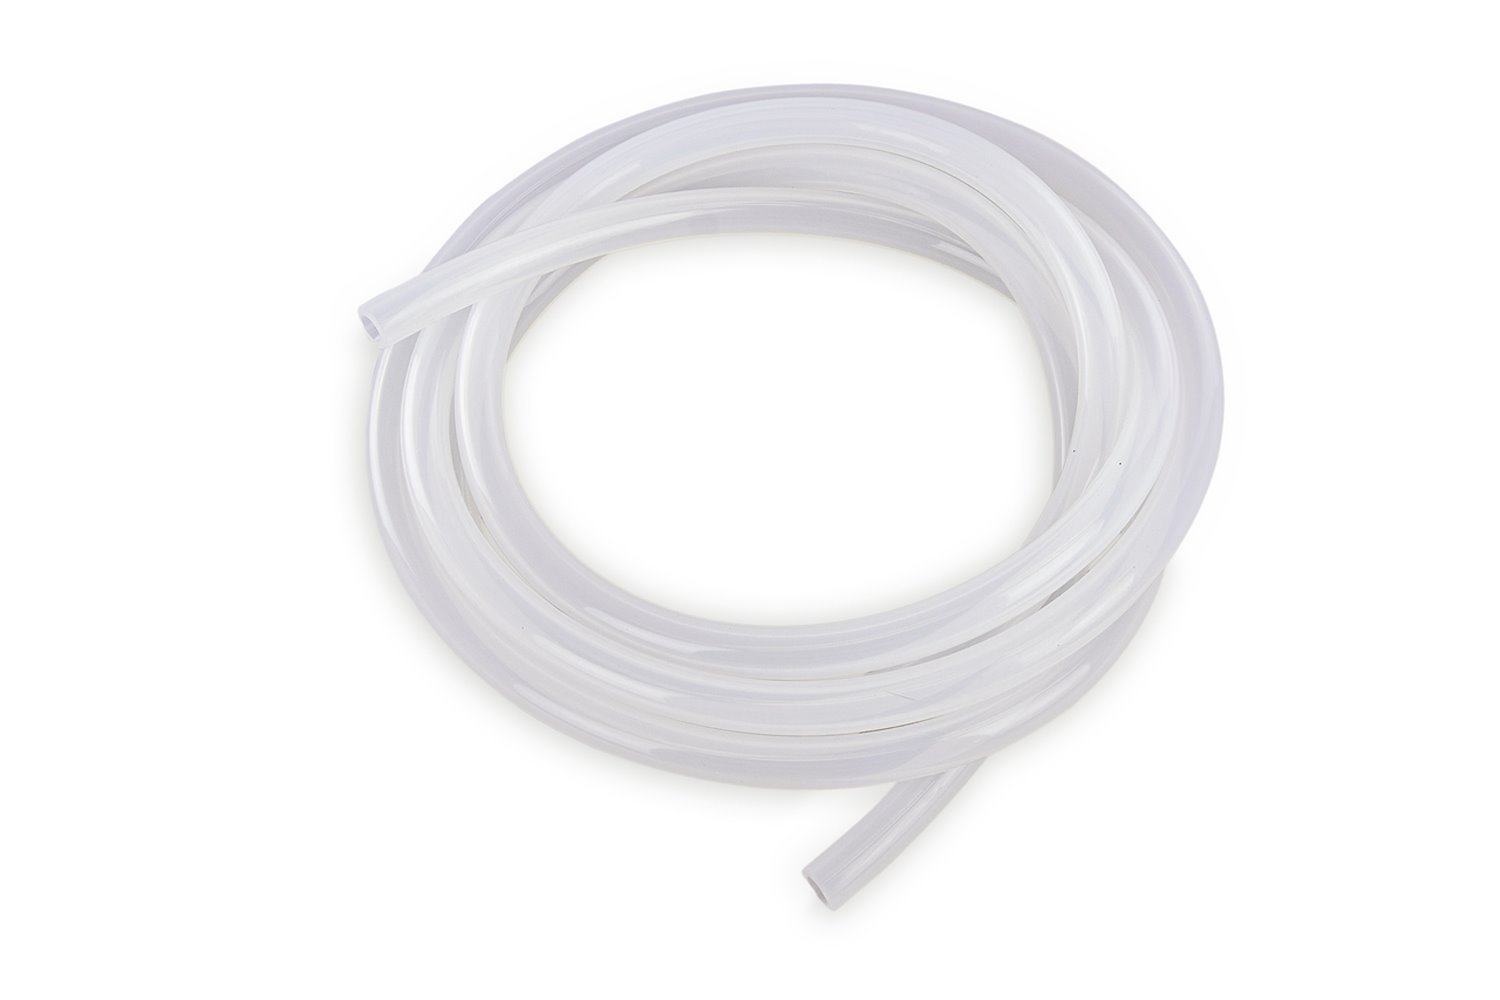 HTSVH8-CLEARx5 High-Temperature Silicone Vacuum Hose Tubing, 5/16 in. ID, 5 ft. Roll, Clear